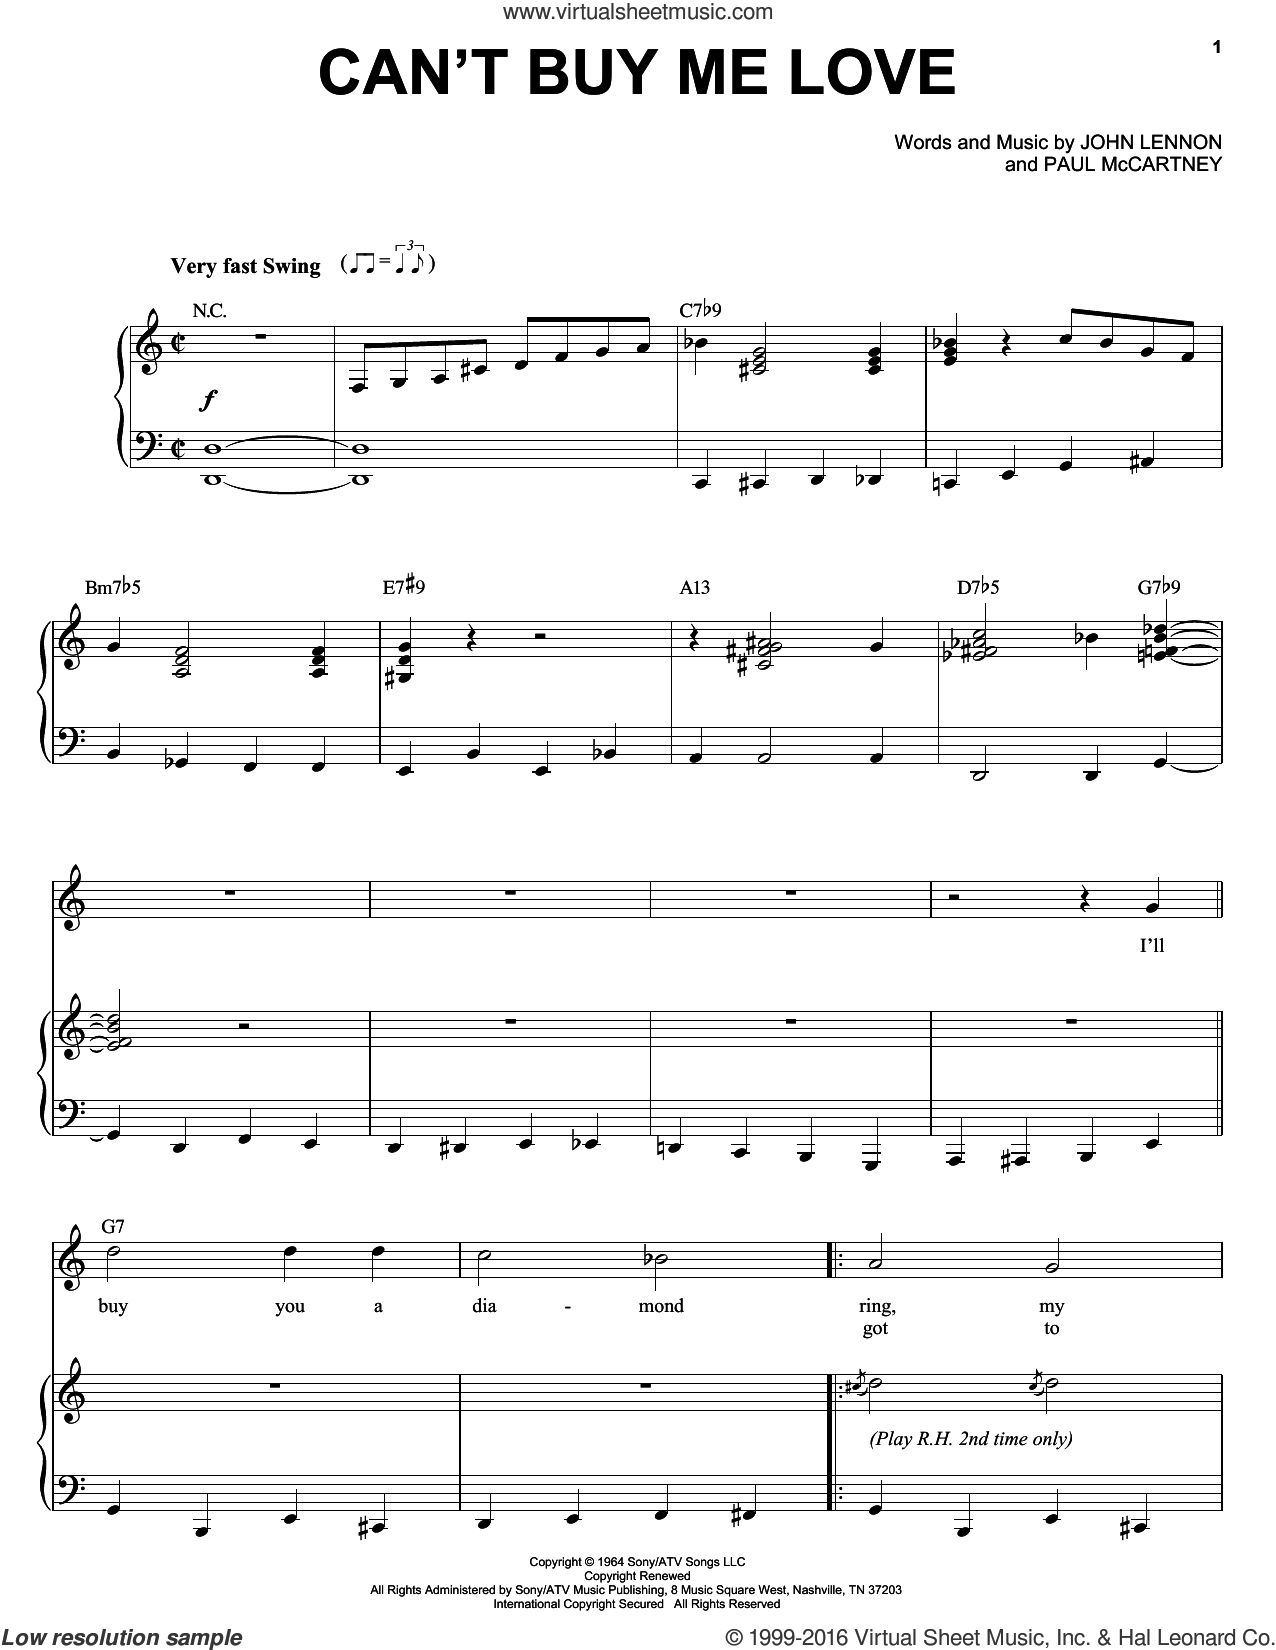 Buble - Can't Buy Me Love sheet music for voice and piano [PDF]